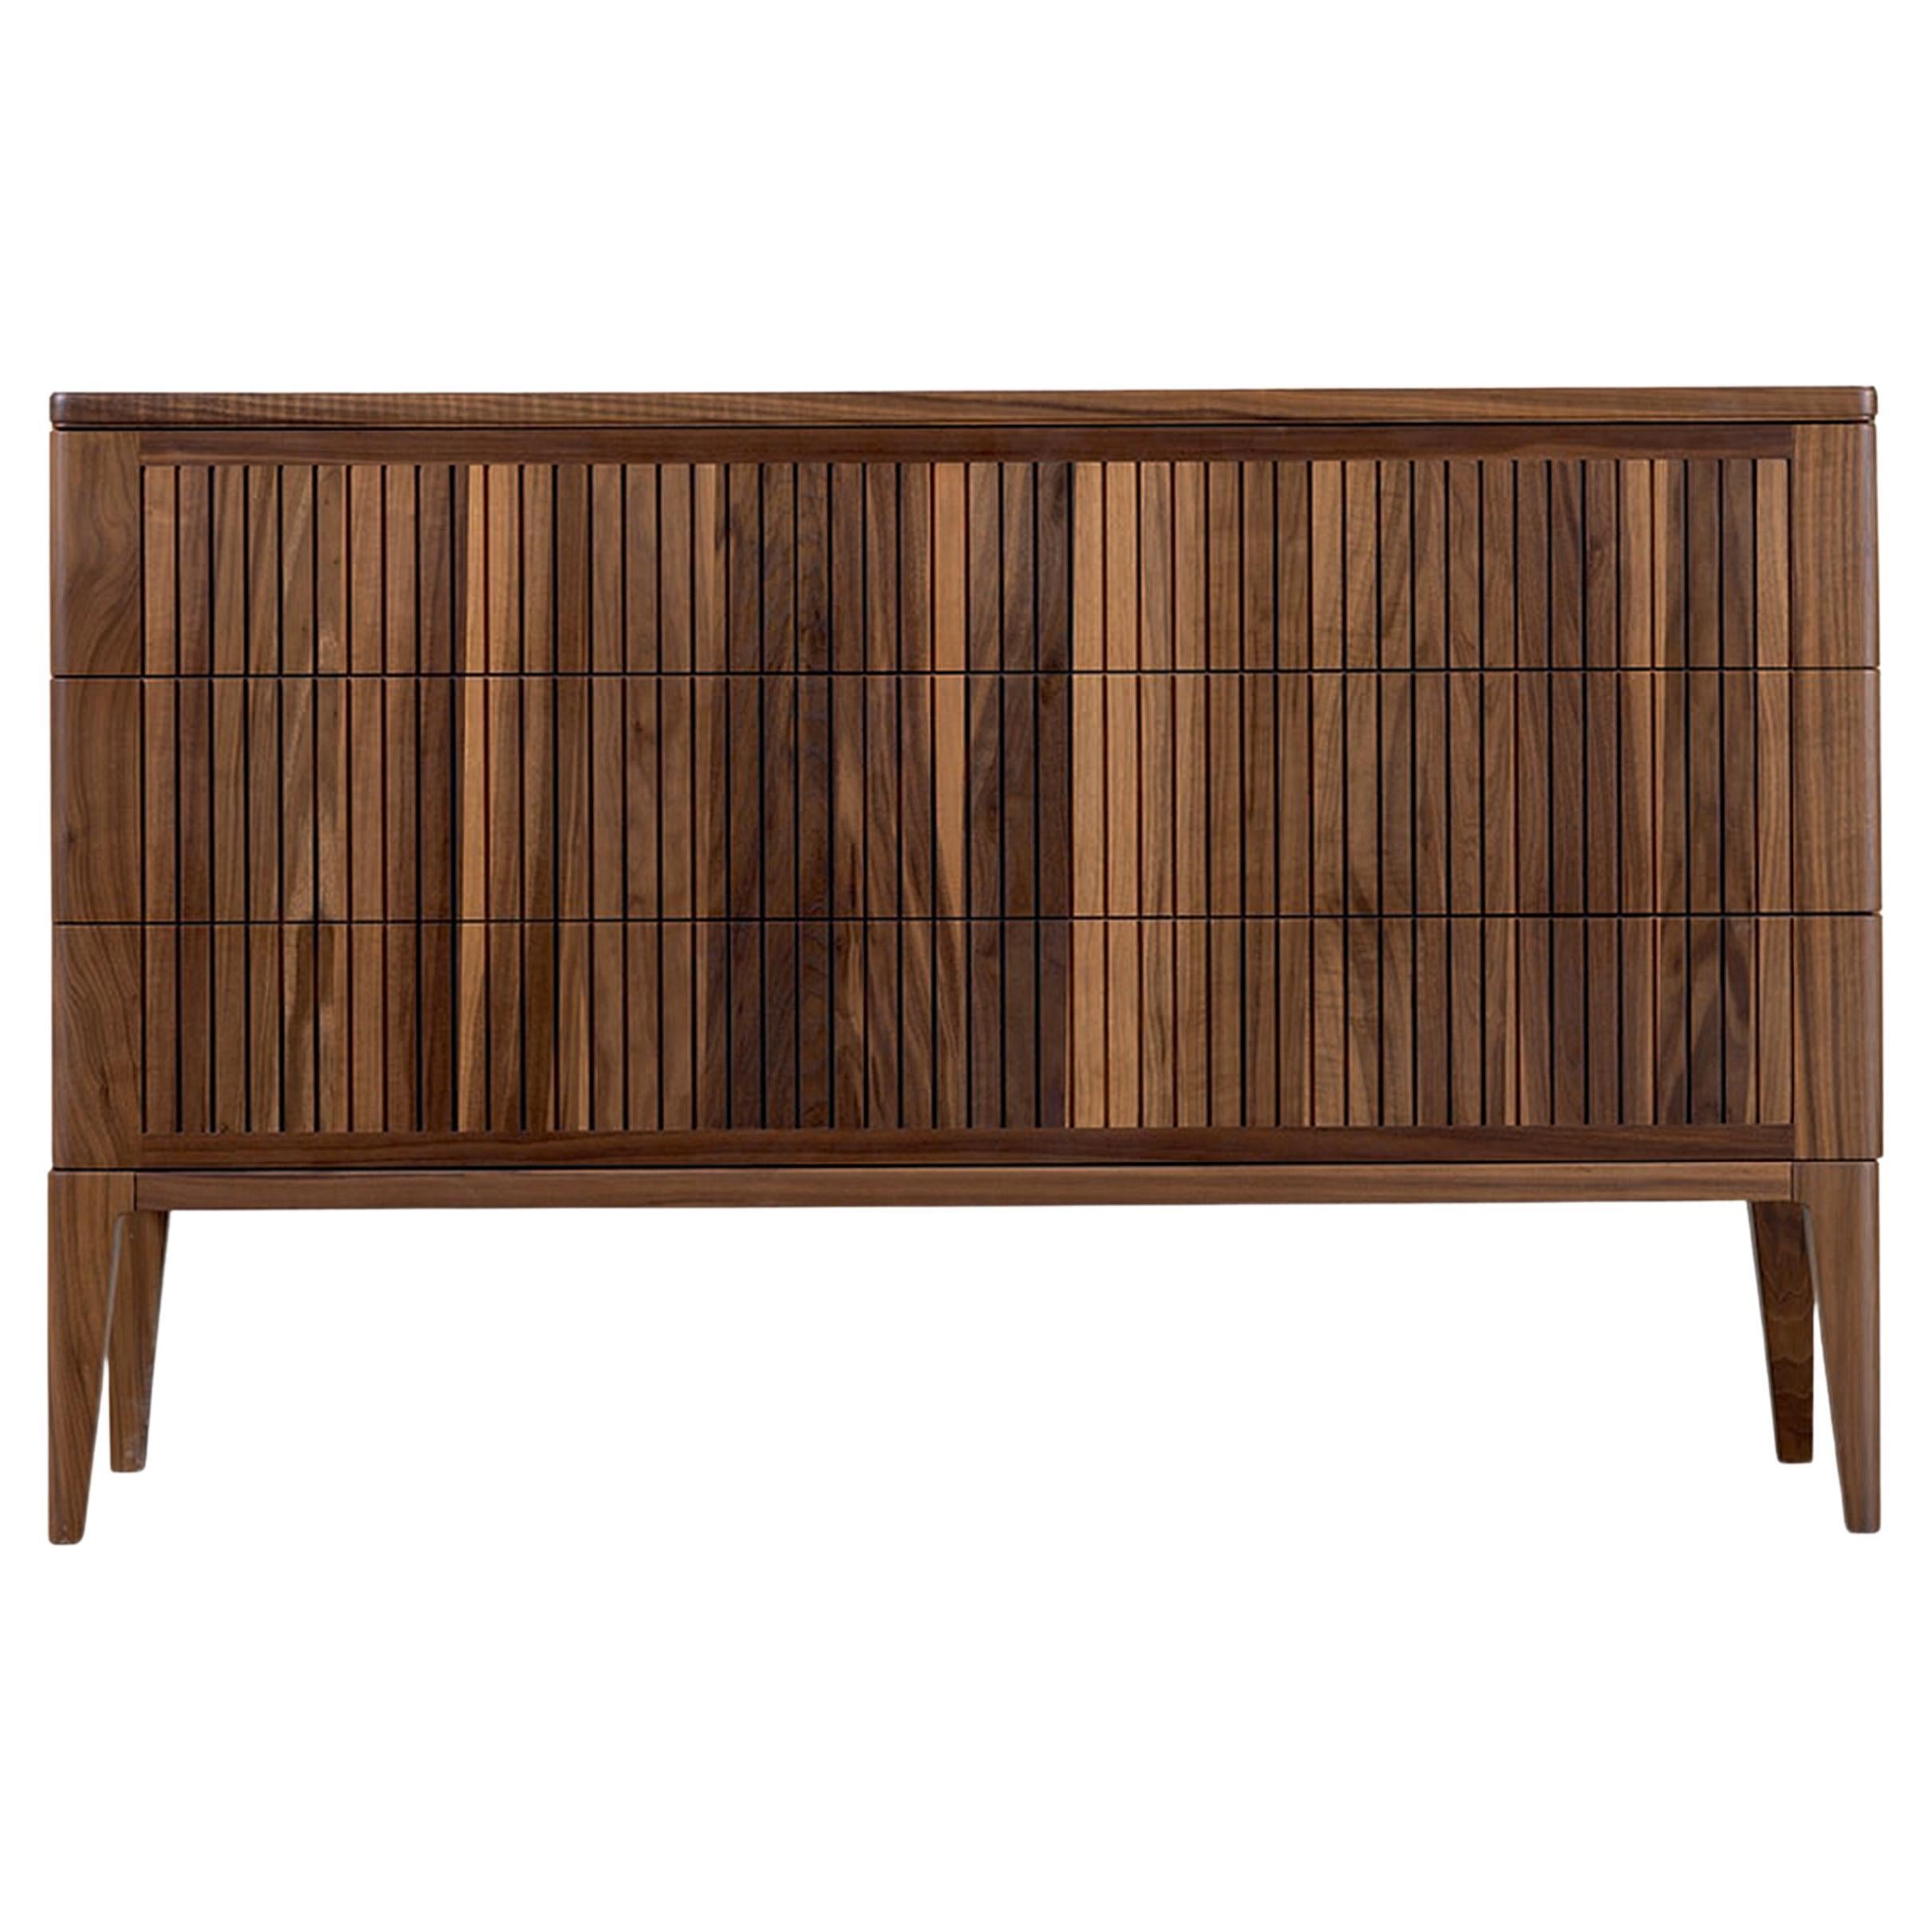 Eleva Solid Wood Dresser, Walnut in Hand-Made Natural Finish, Contemporary For Sale